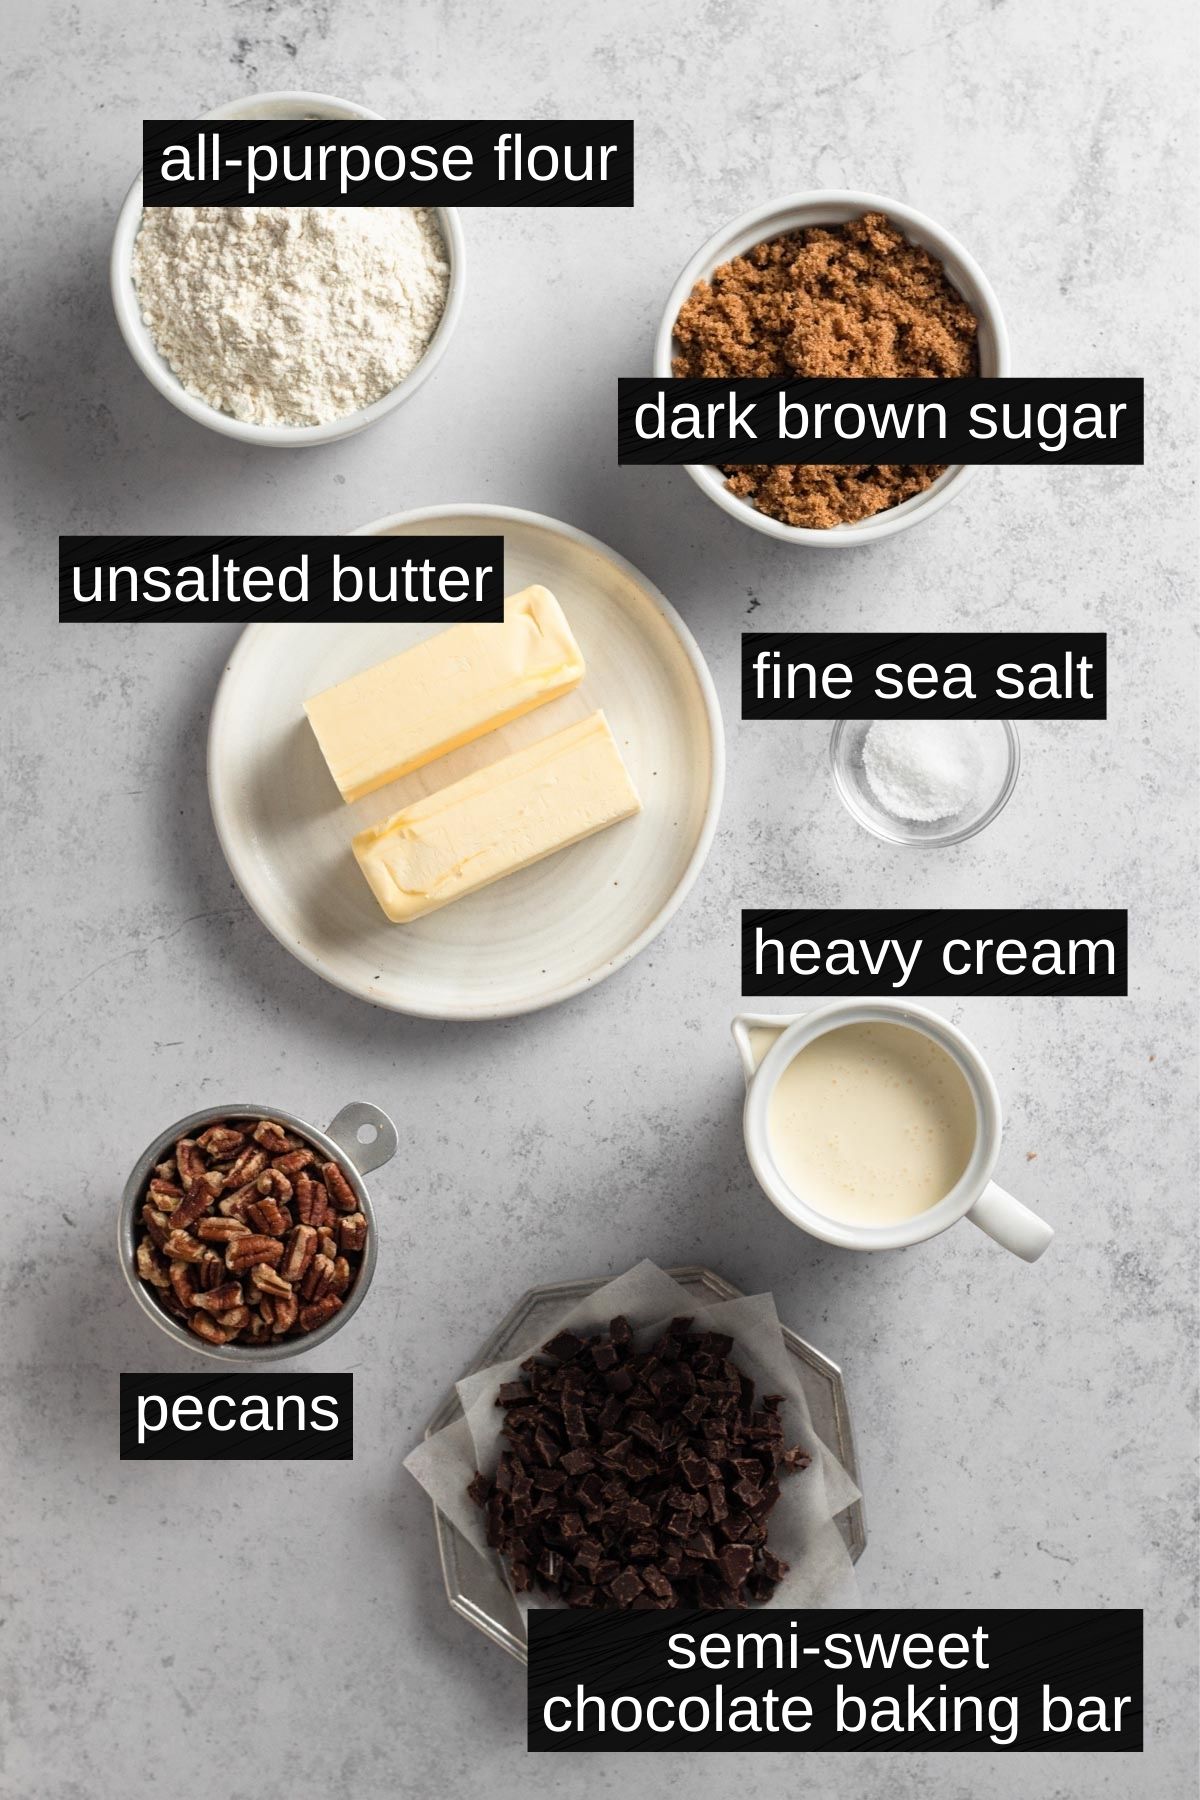 overhead view of recipe ingredients on a gray surface